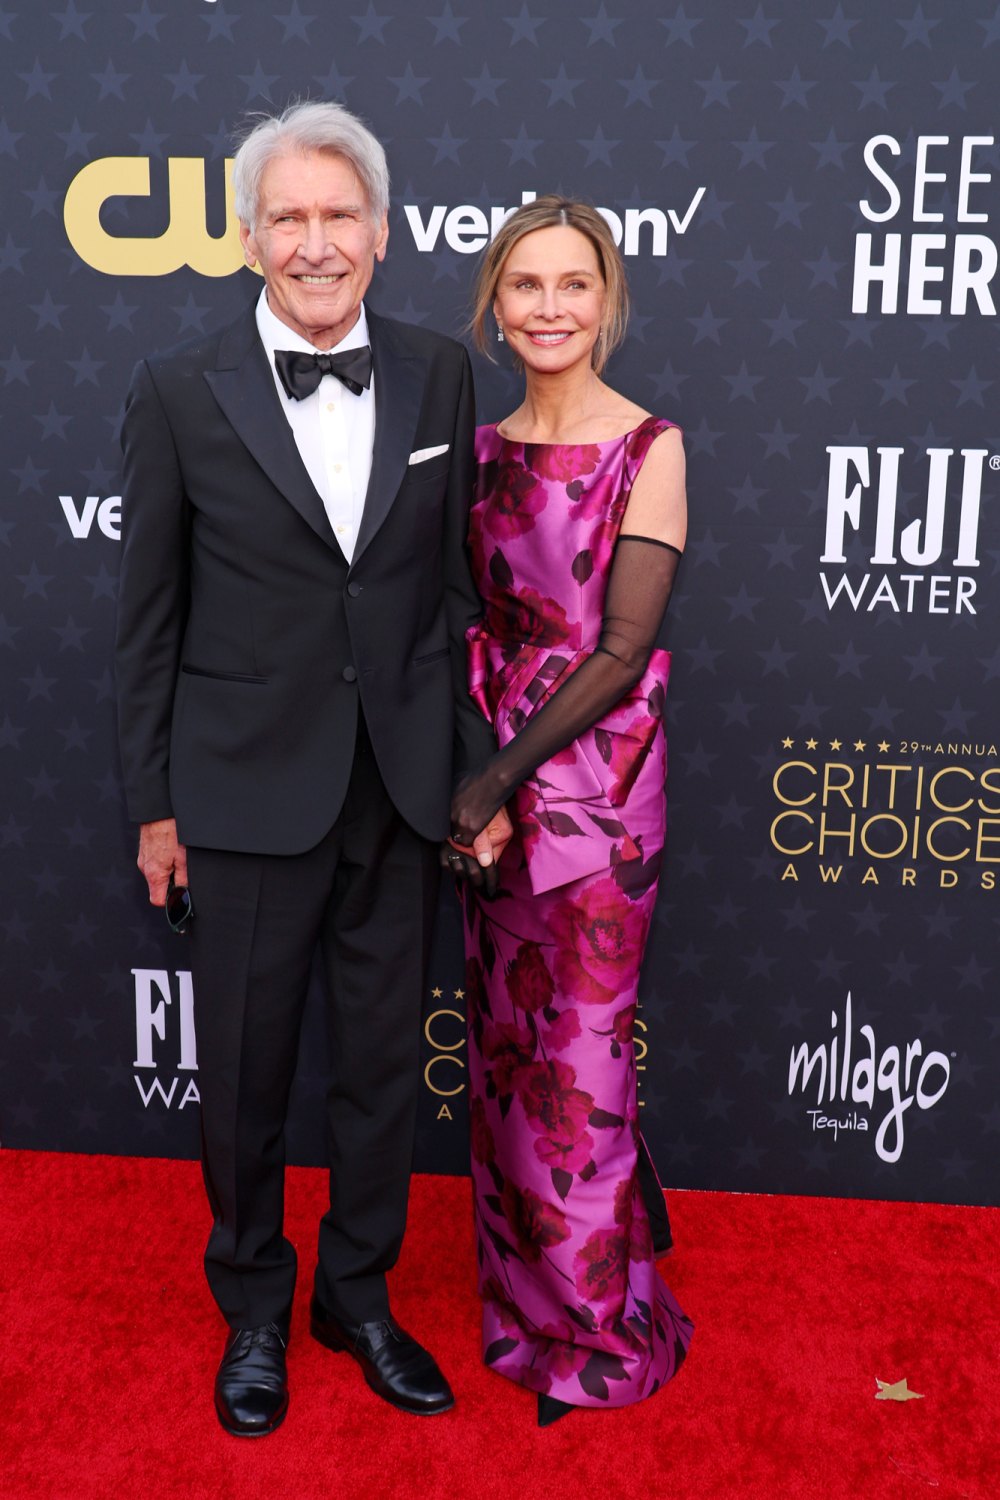 Calista Flockhart Gushes Over Her Supportive Relationship With Harrison Ford